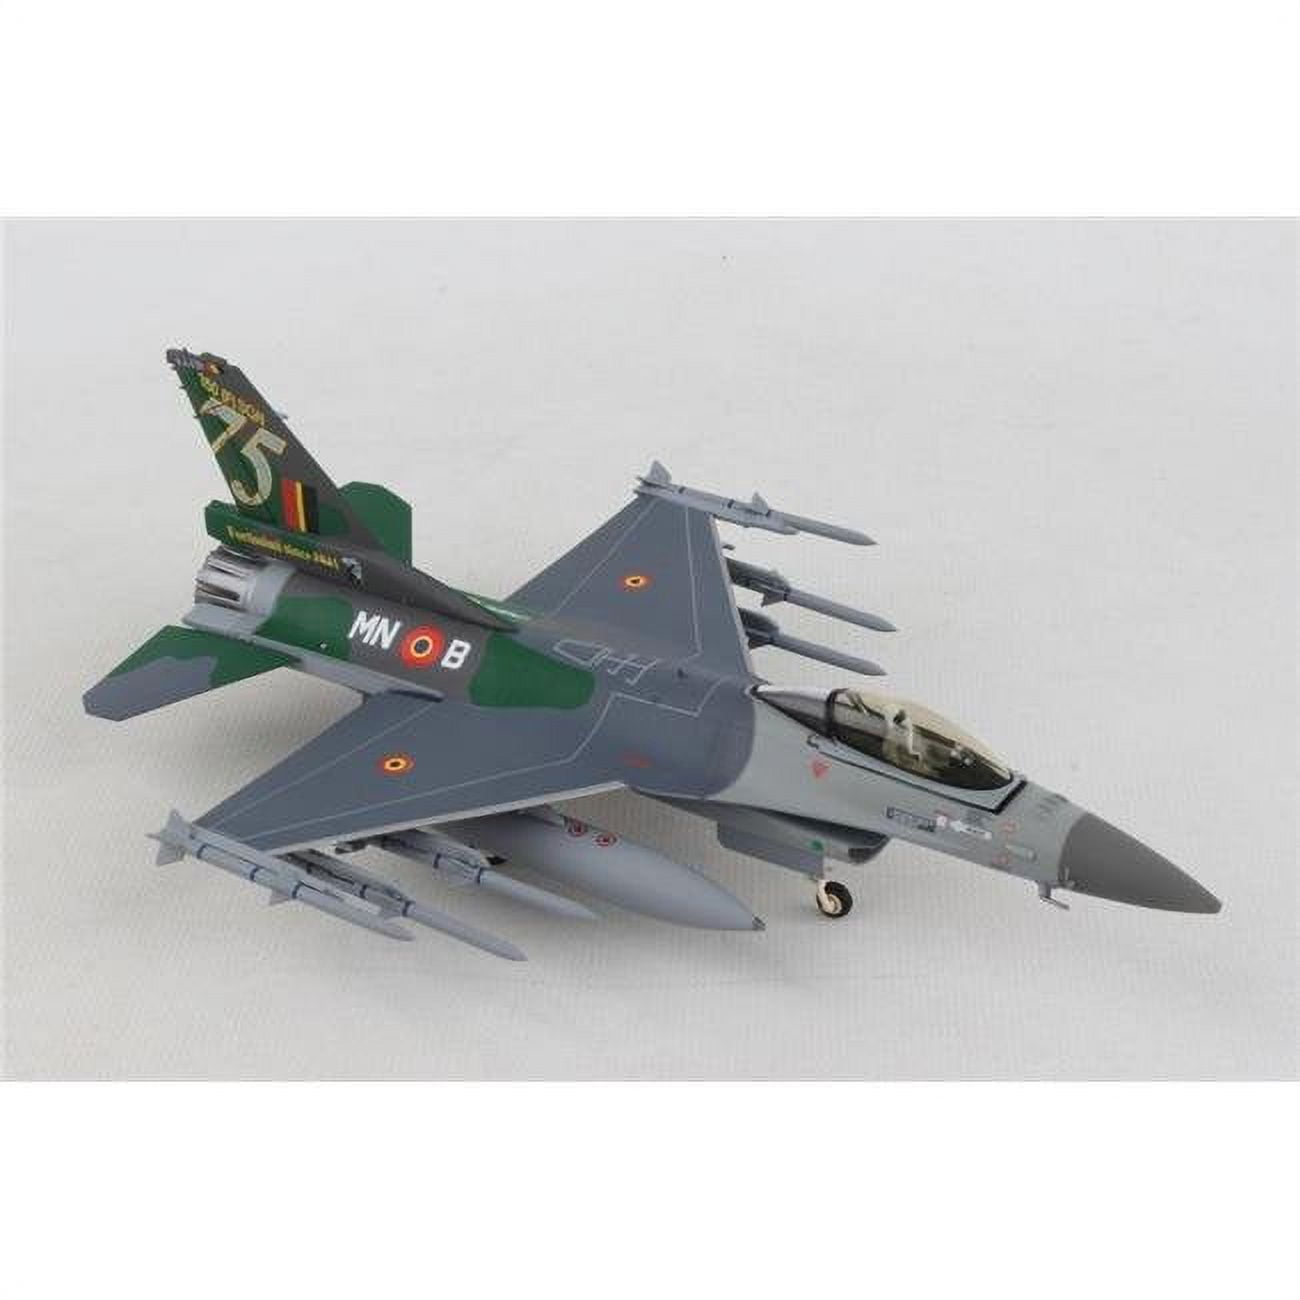 He580434 1 By 72 Scale Belgian Air Force F-16a 350 Squadron 75 Years Model Aircraft